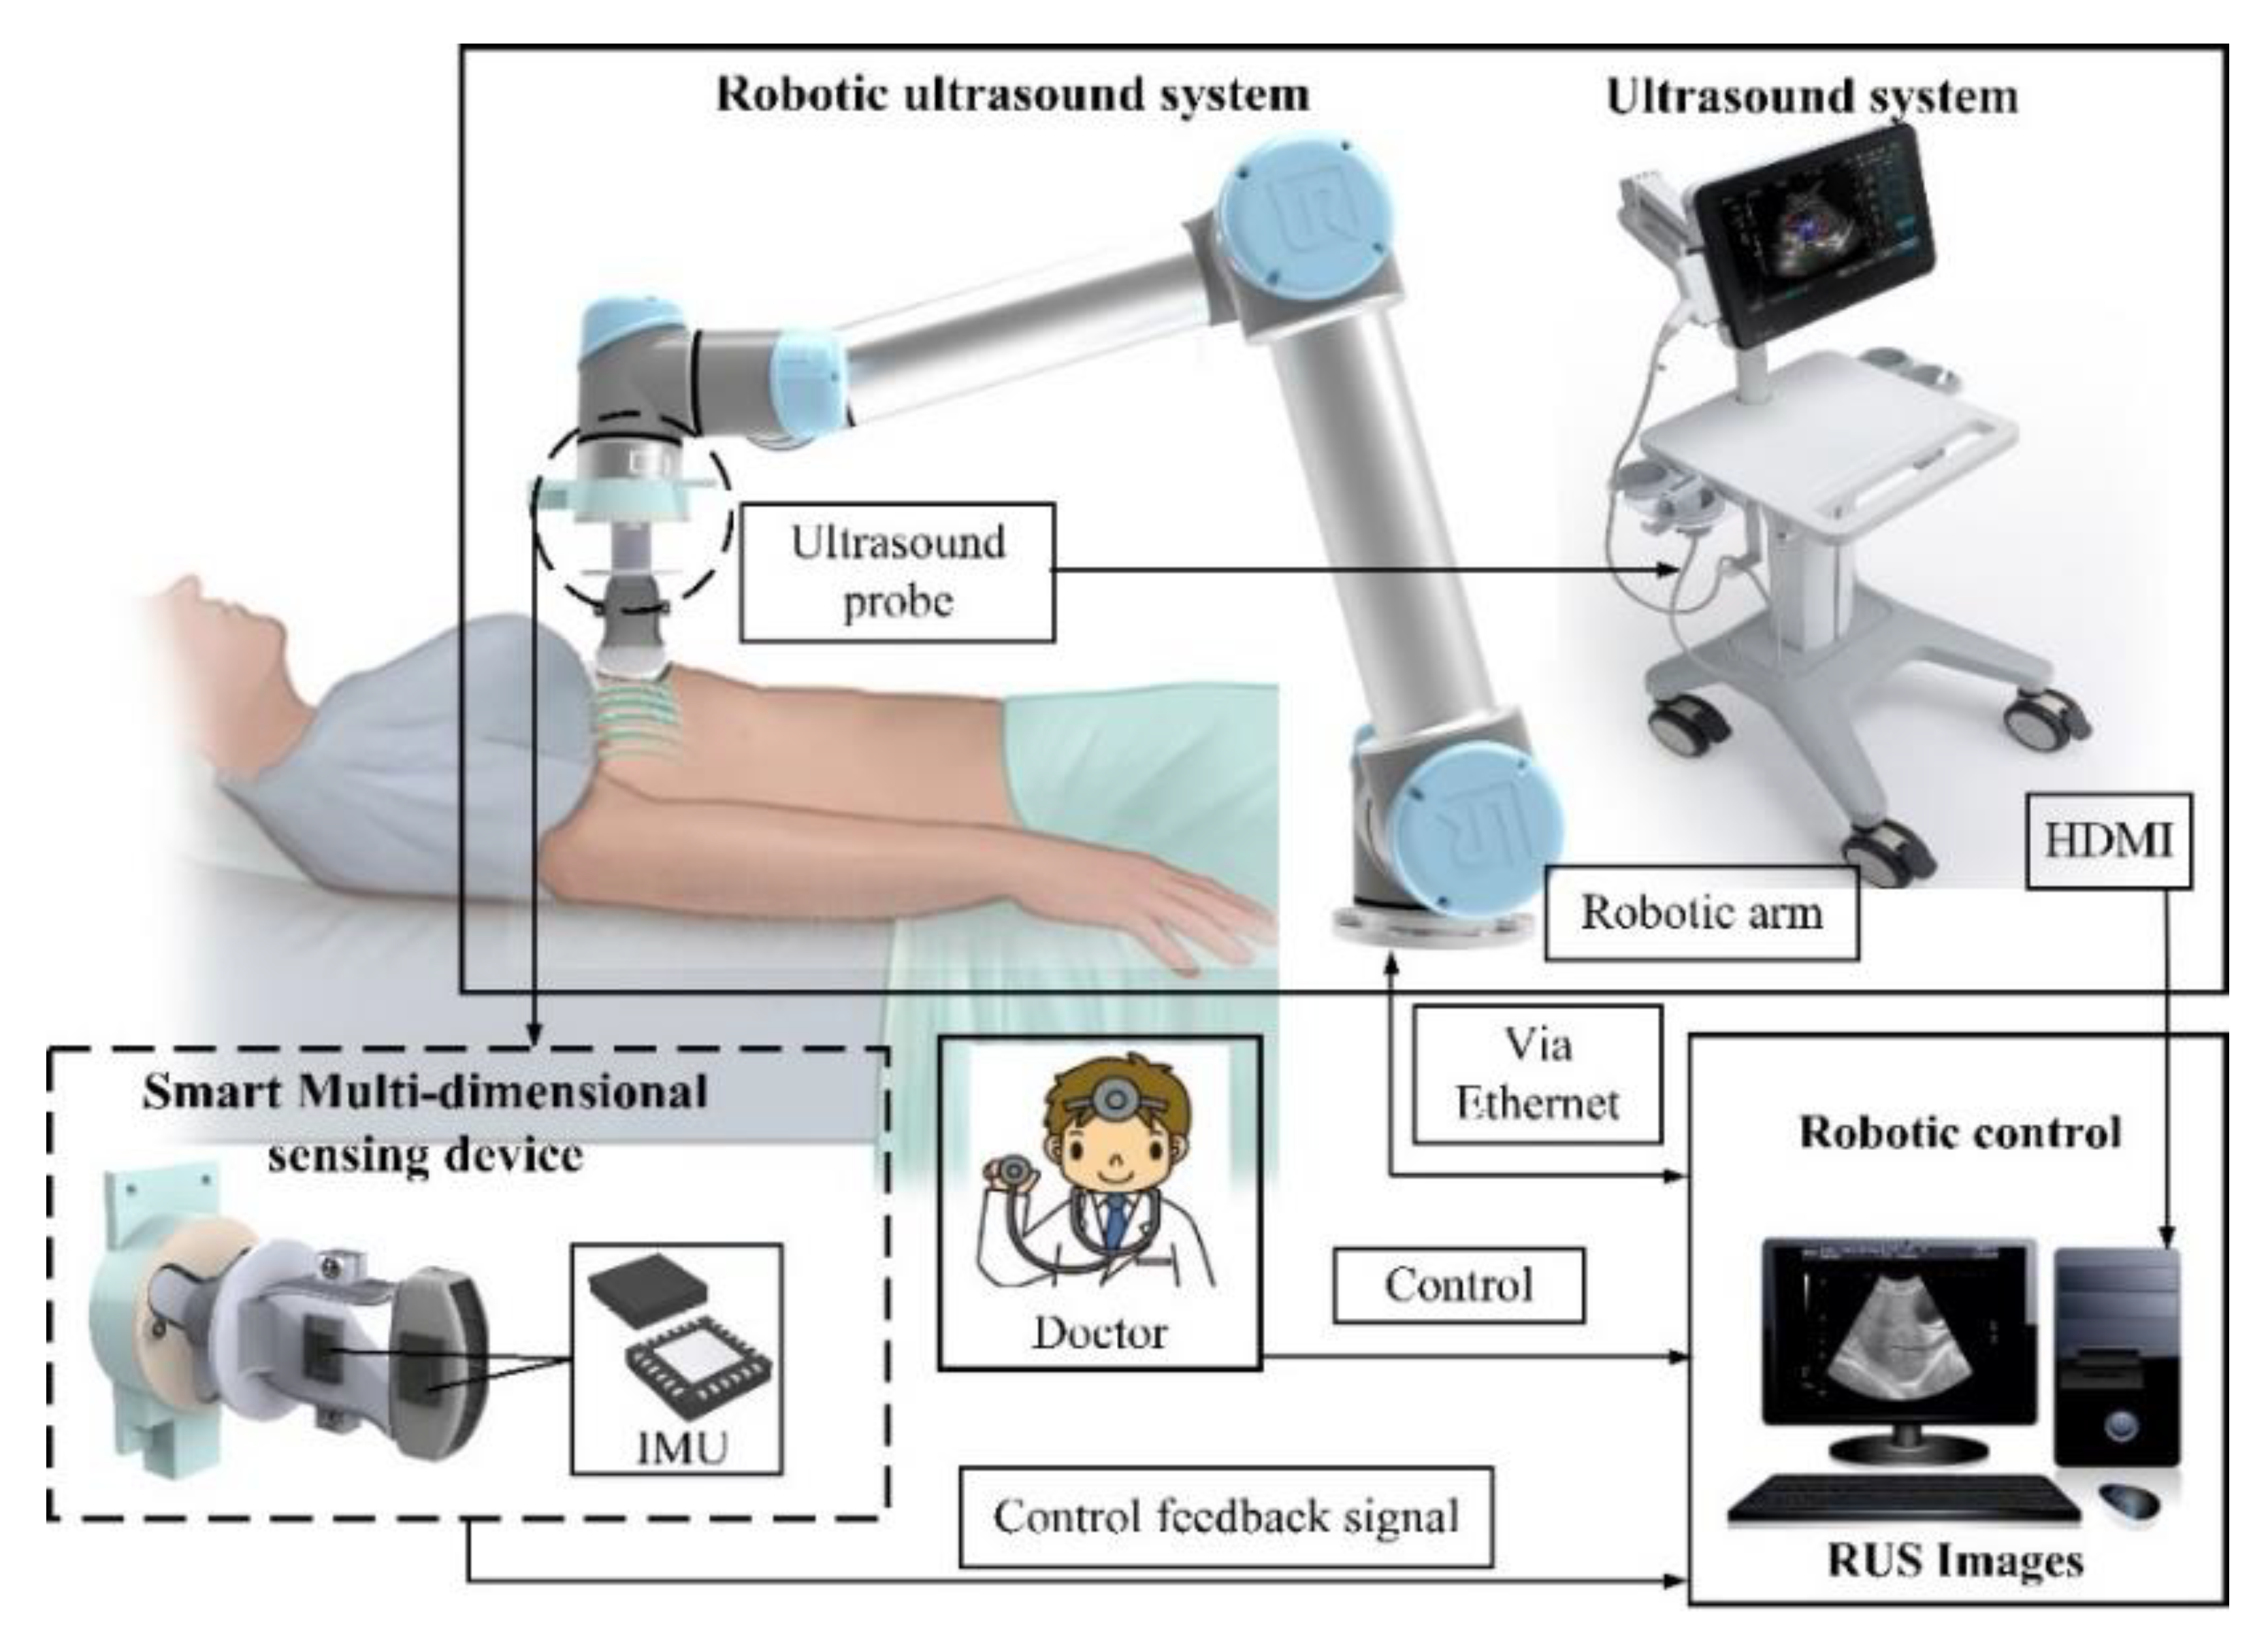 Sensors | Free Full-Text | An Improved Sensing Method of a Robotic  Ultrasound System for Real-Time Force and Angle Calibration